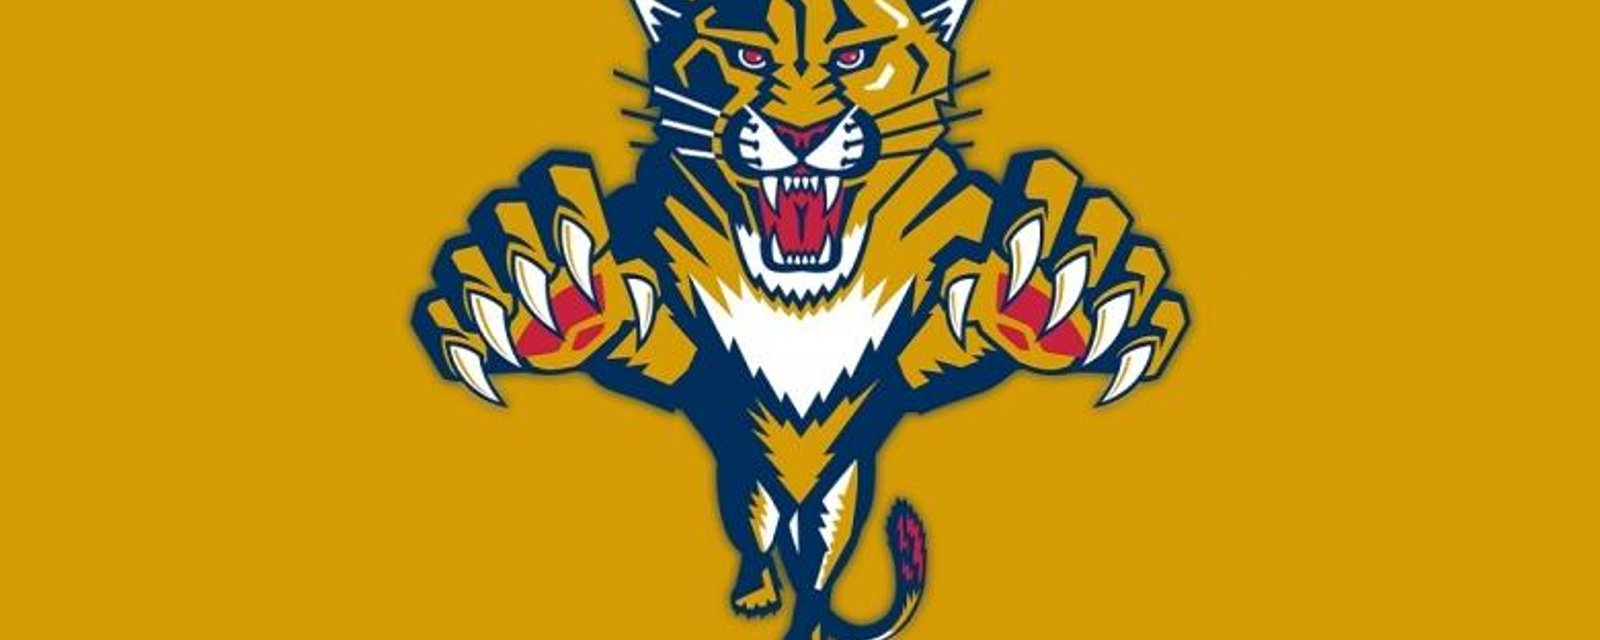 Breaking: Florida Panthers unveil their new jerseys and new logo.